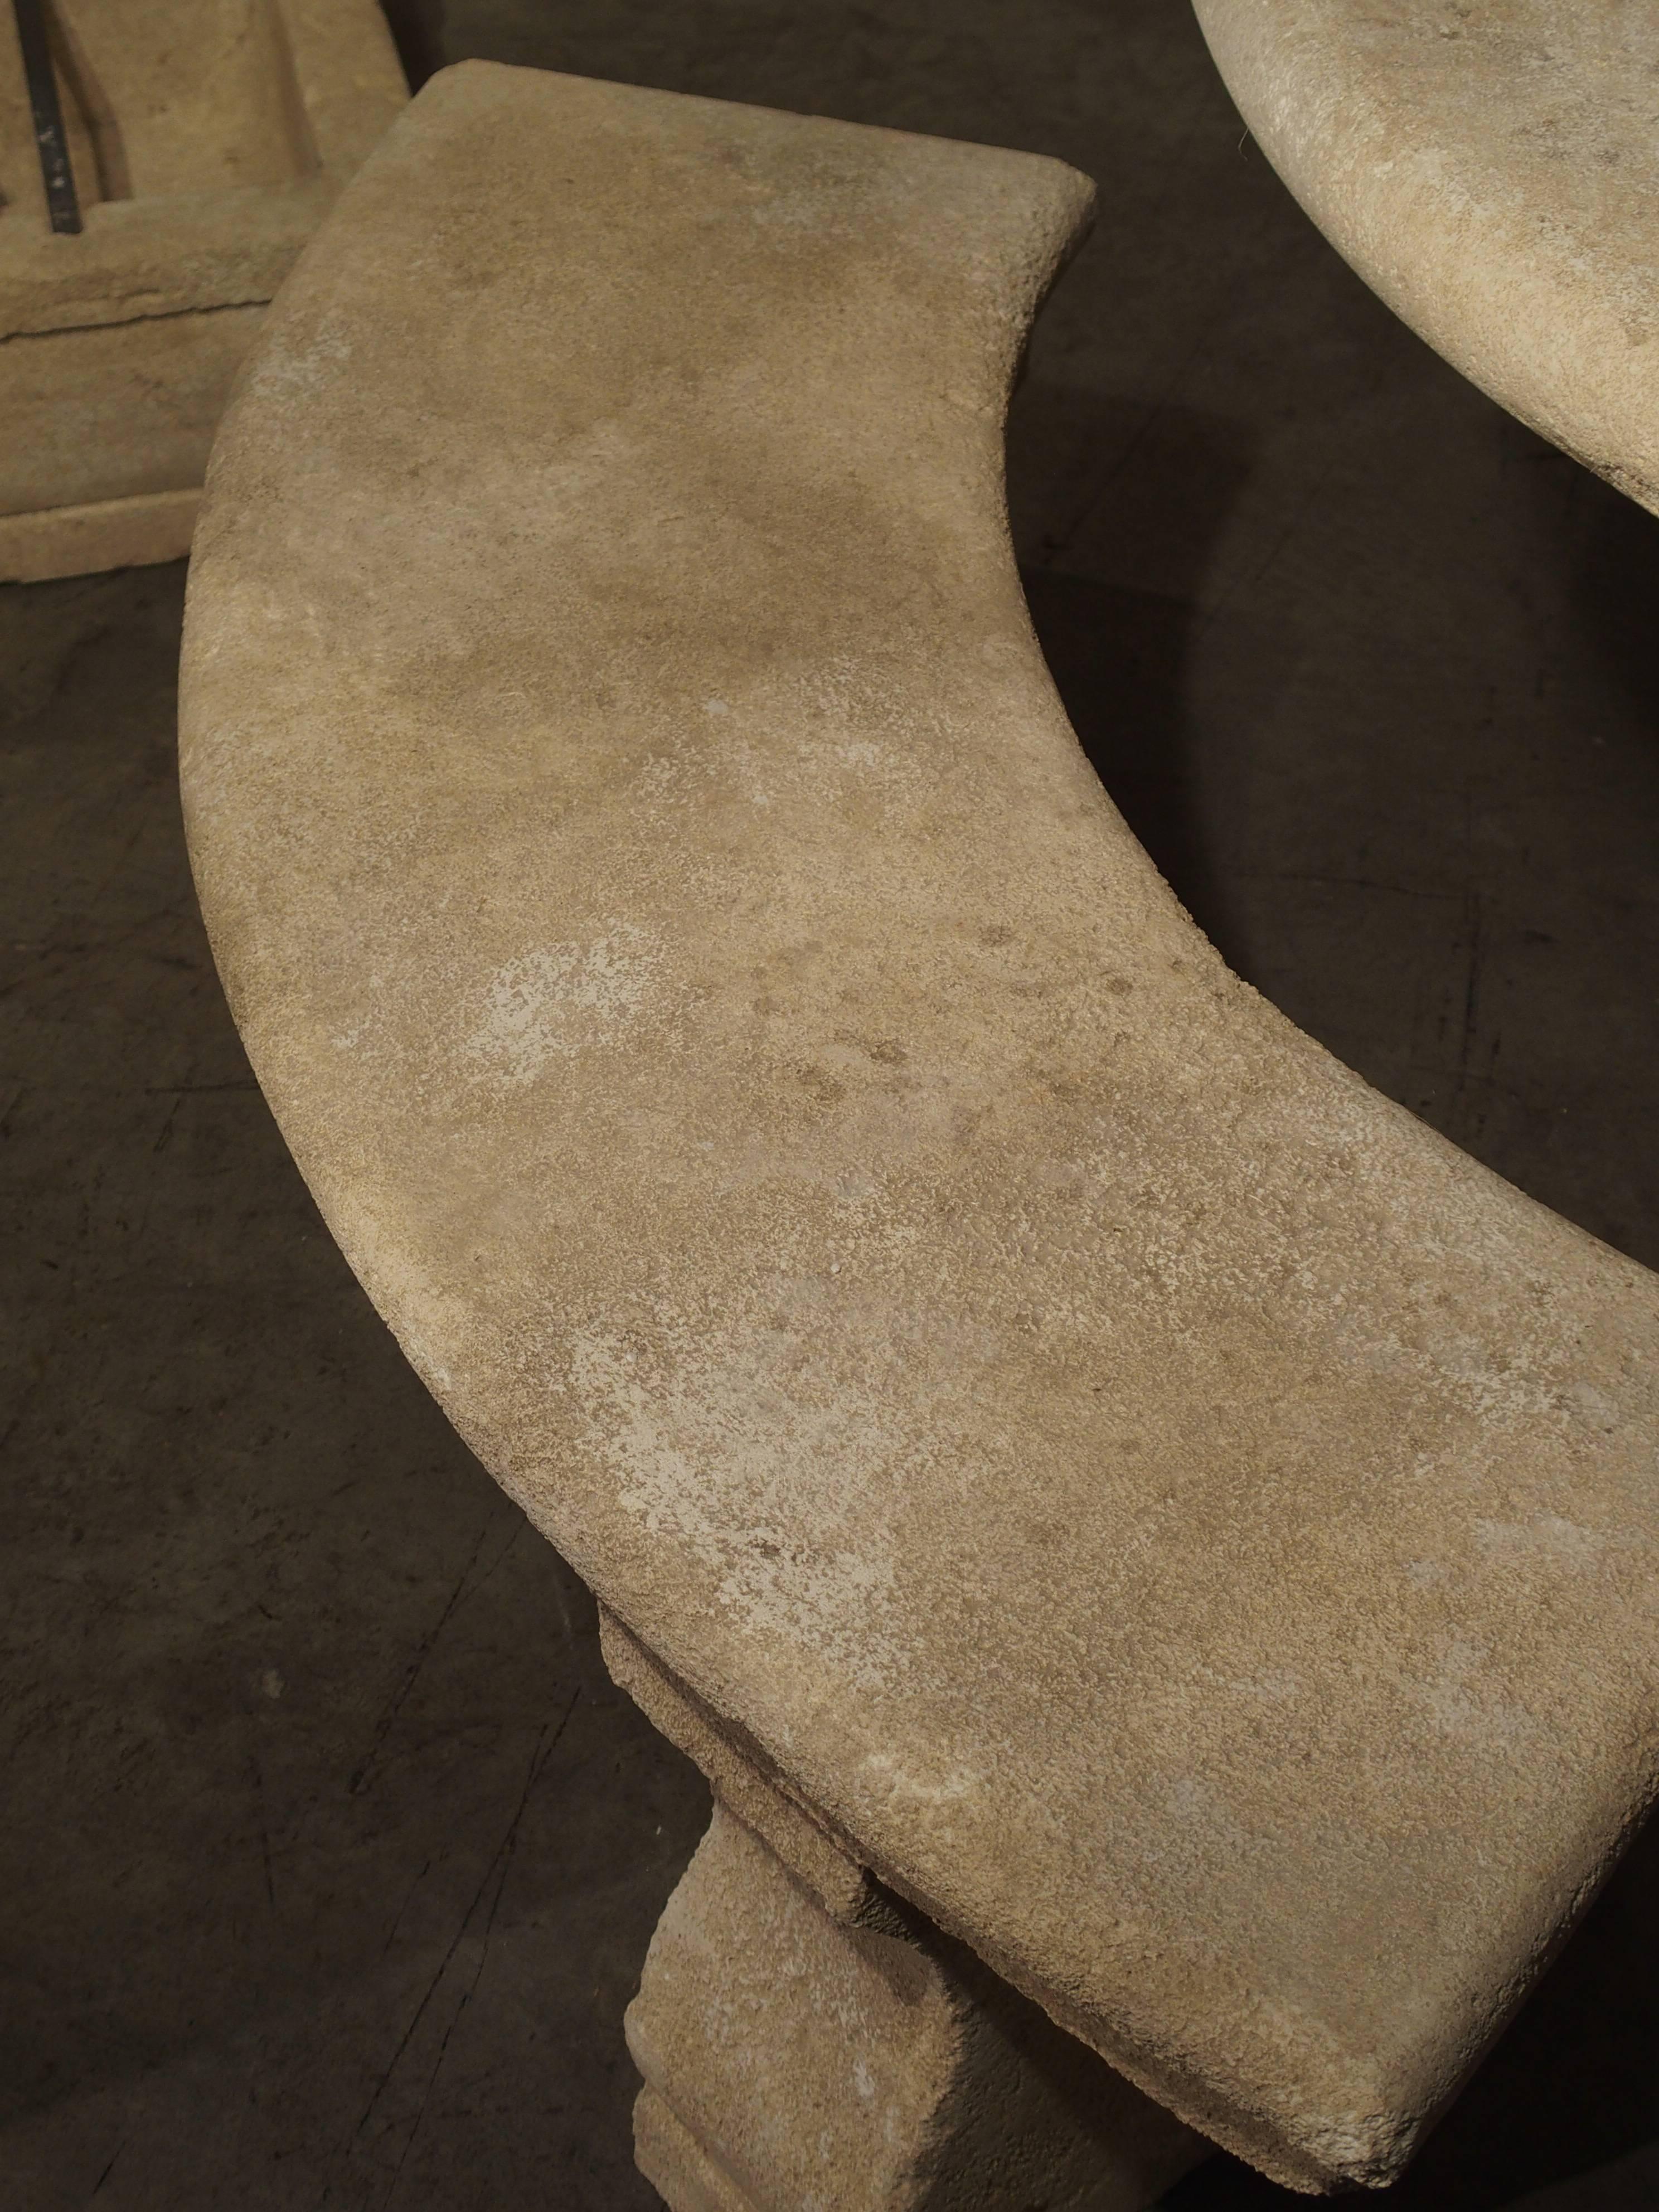 This hand carved limestone bench park bench is from Provence, France. The seat is one solid stepped in piece of stone, and it rests upon two shaped block legs and feet. Perfect for placing with a table or left on its own in a garden, this curved